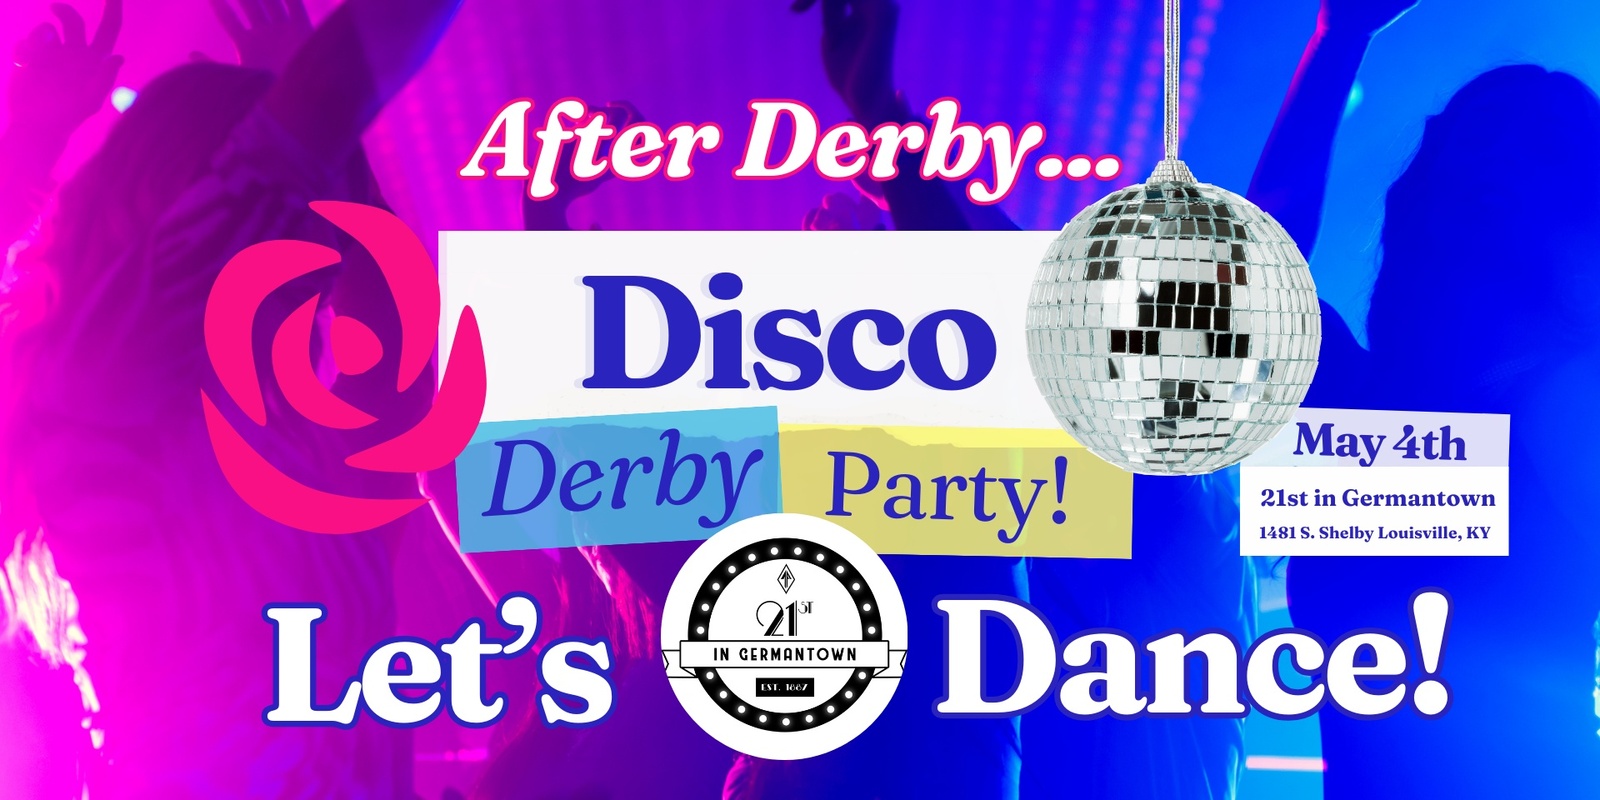 Banner image for Disco Derby Party - Let's Dance! Saturday May 4th at 21st in Germantown